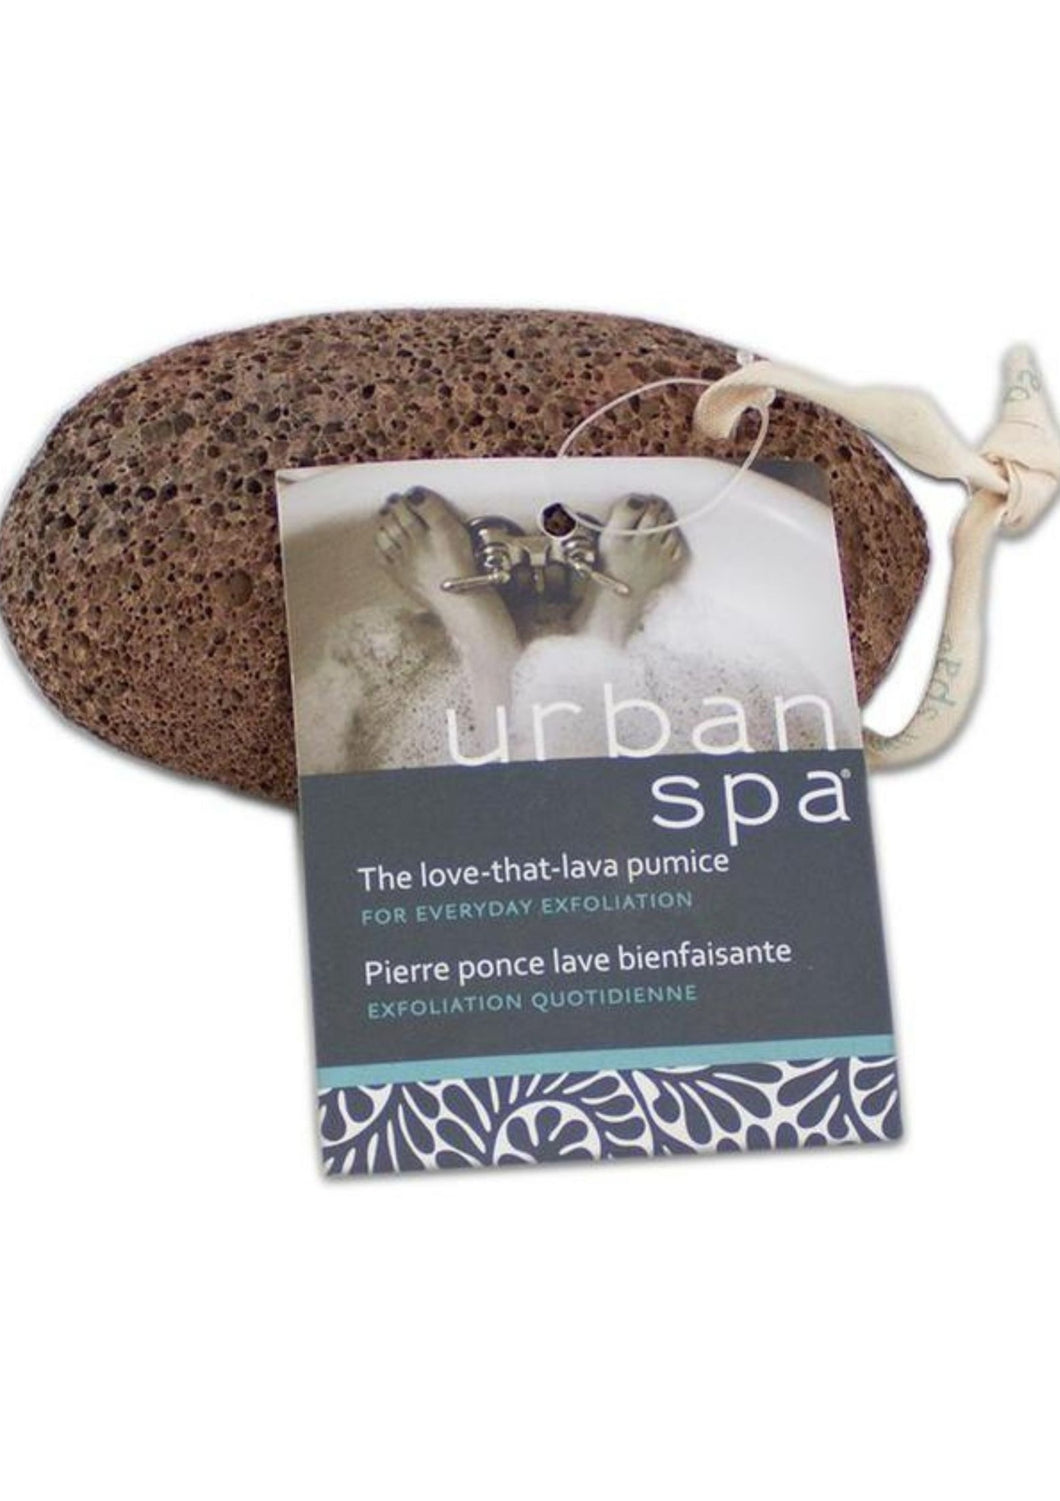 Everyday exfoliation.  Cooled volcanic lava infused with magnesium, iron and oxygen make this a natural for exfoliating calluses, rough spots and build-up of dead skin. Use on damp daily to reveal the soft and smooth skin beneath.  URBAN SPA $5.00